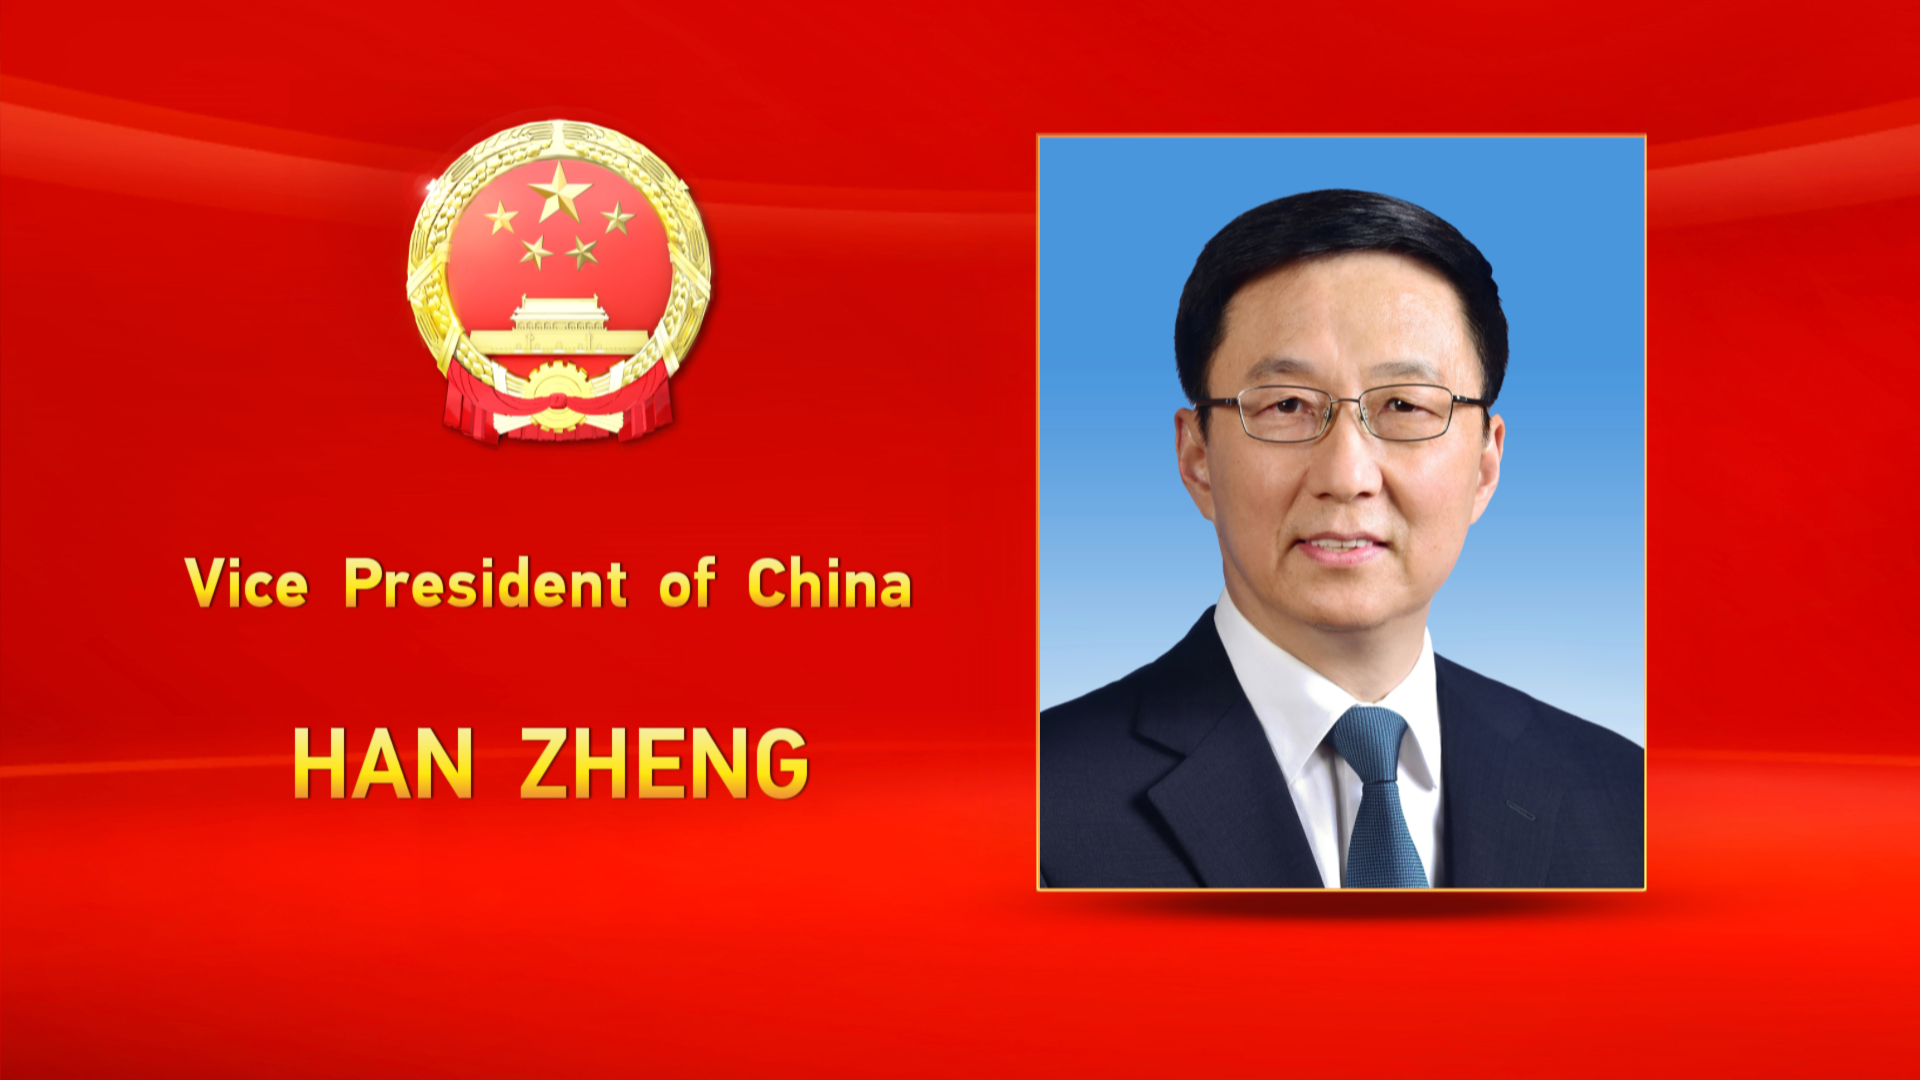 Brief introduction of Han Zheng – Chinese vice president